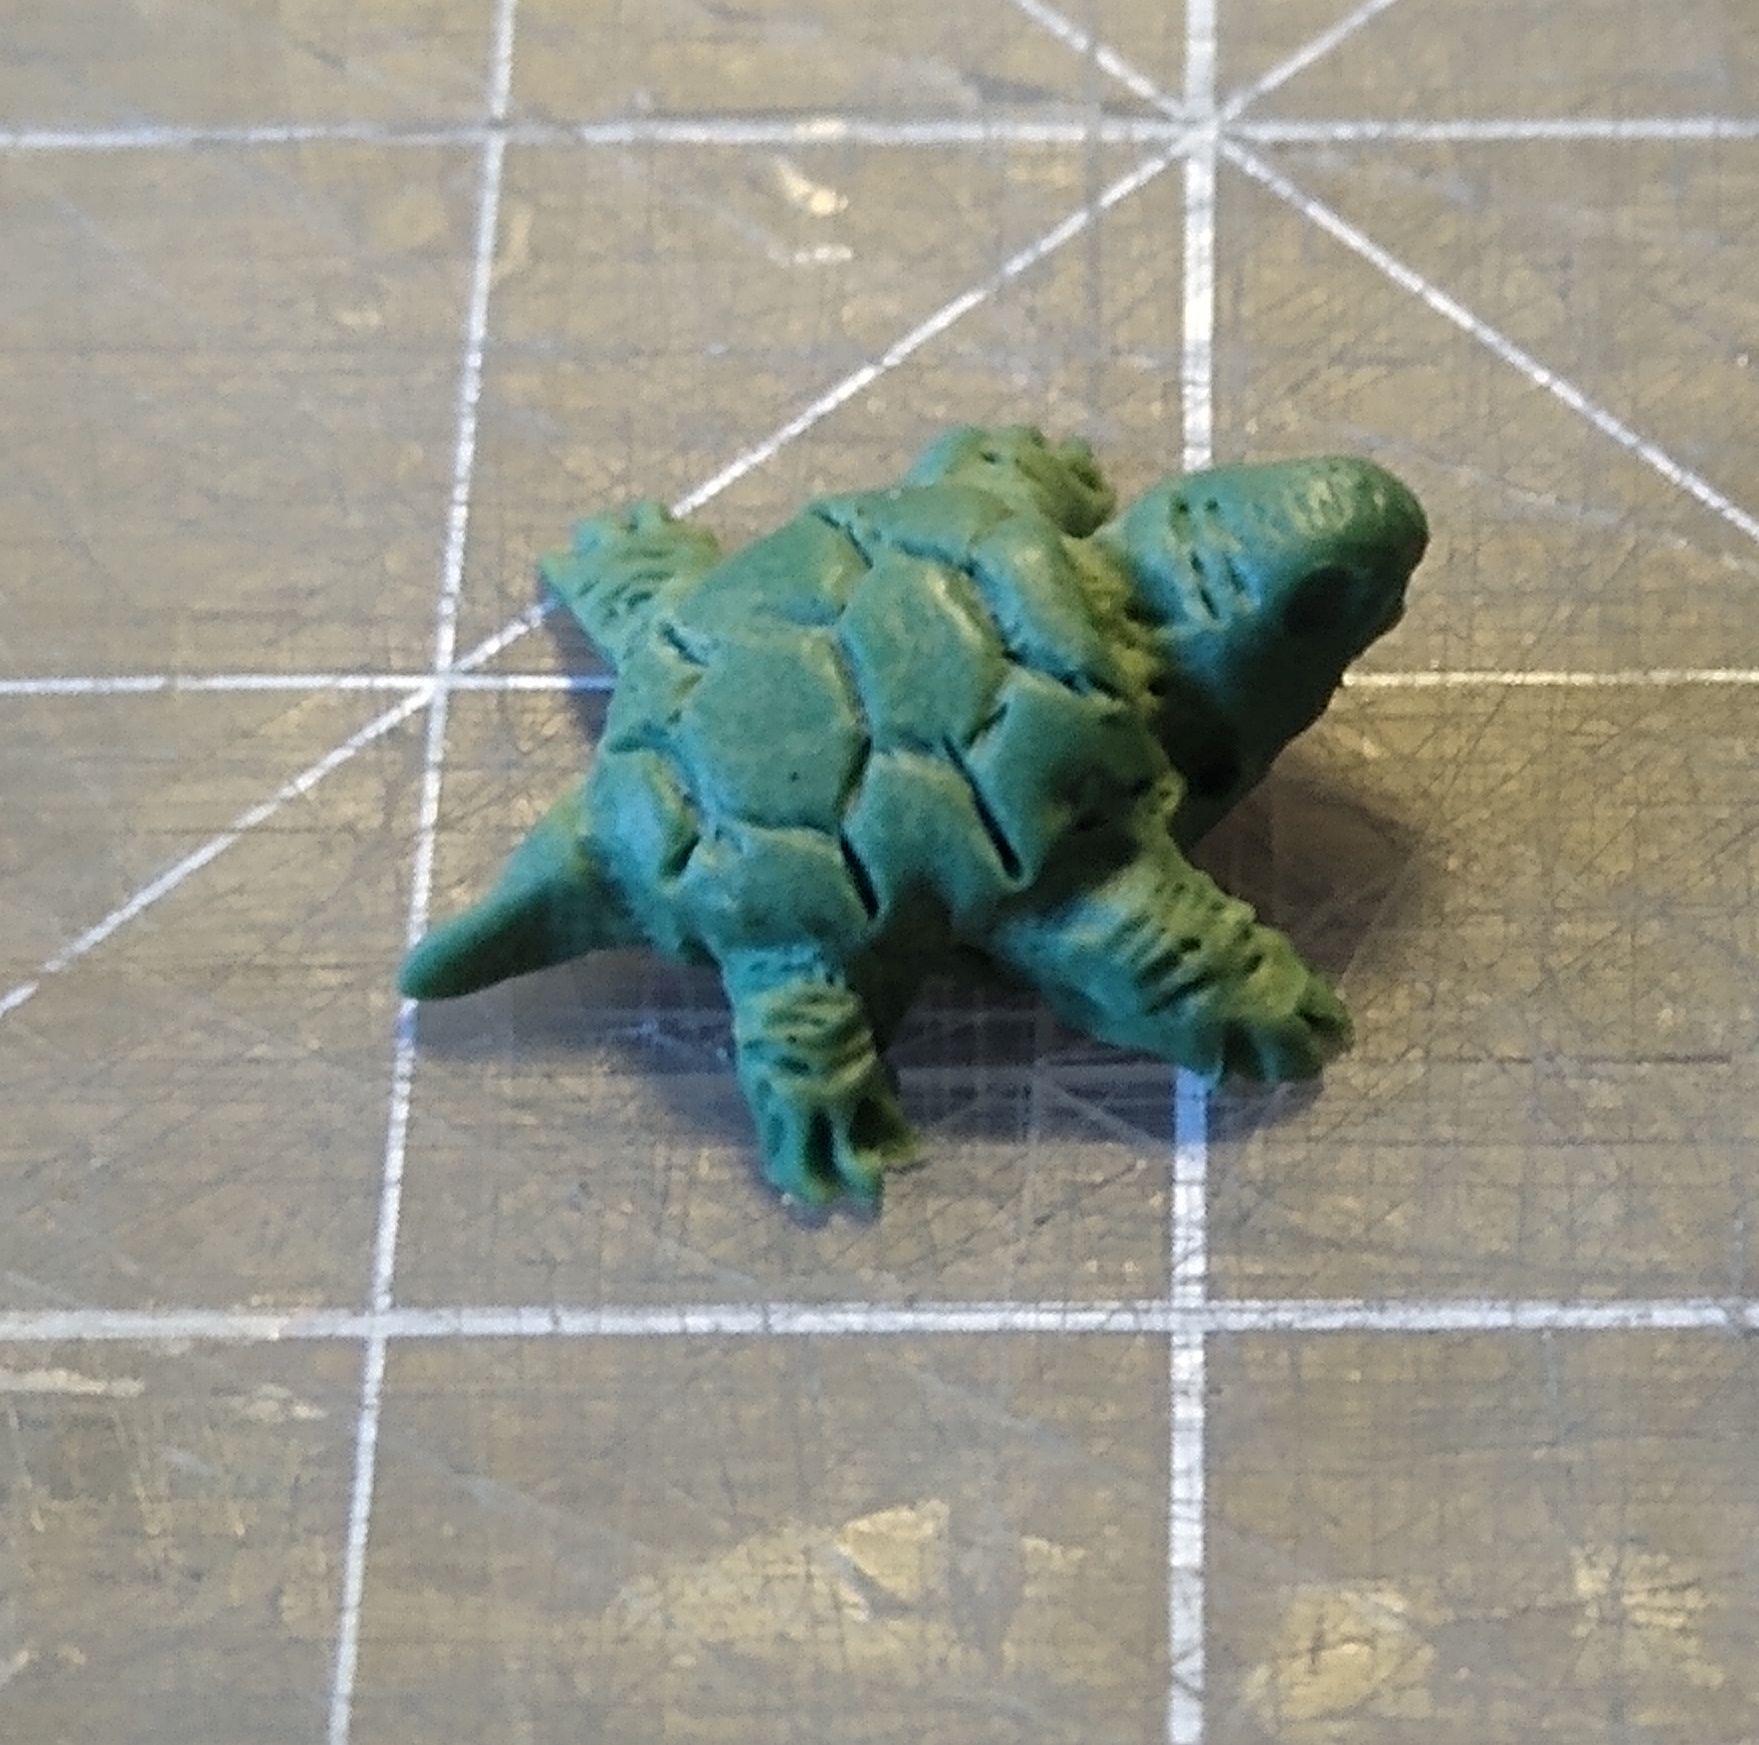 Dragon, Dungeons, Dungeons And Dragons, Familiar, Mini, Miniature, Monster, Sculpting, Turtle